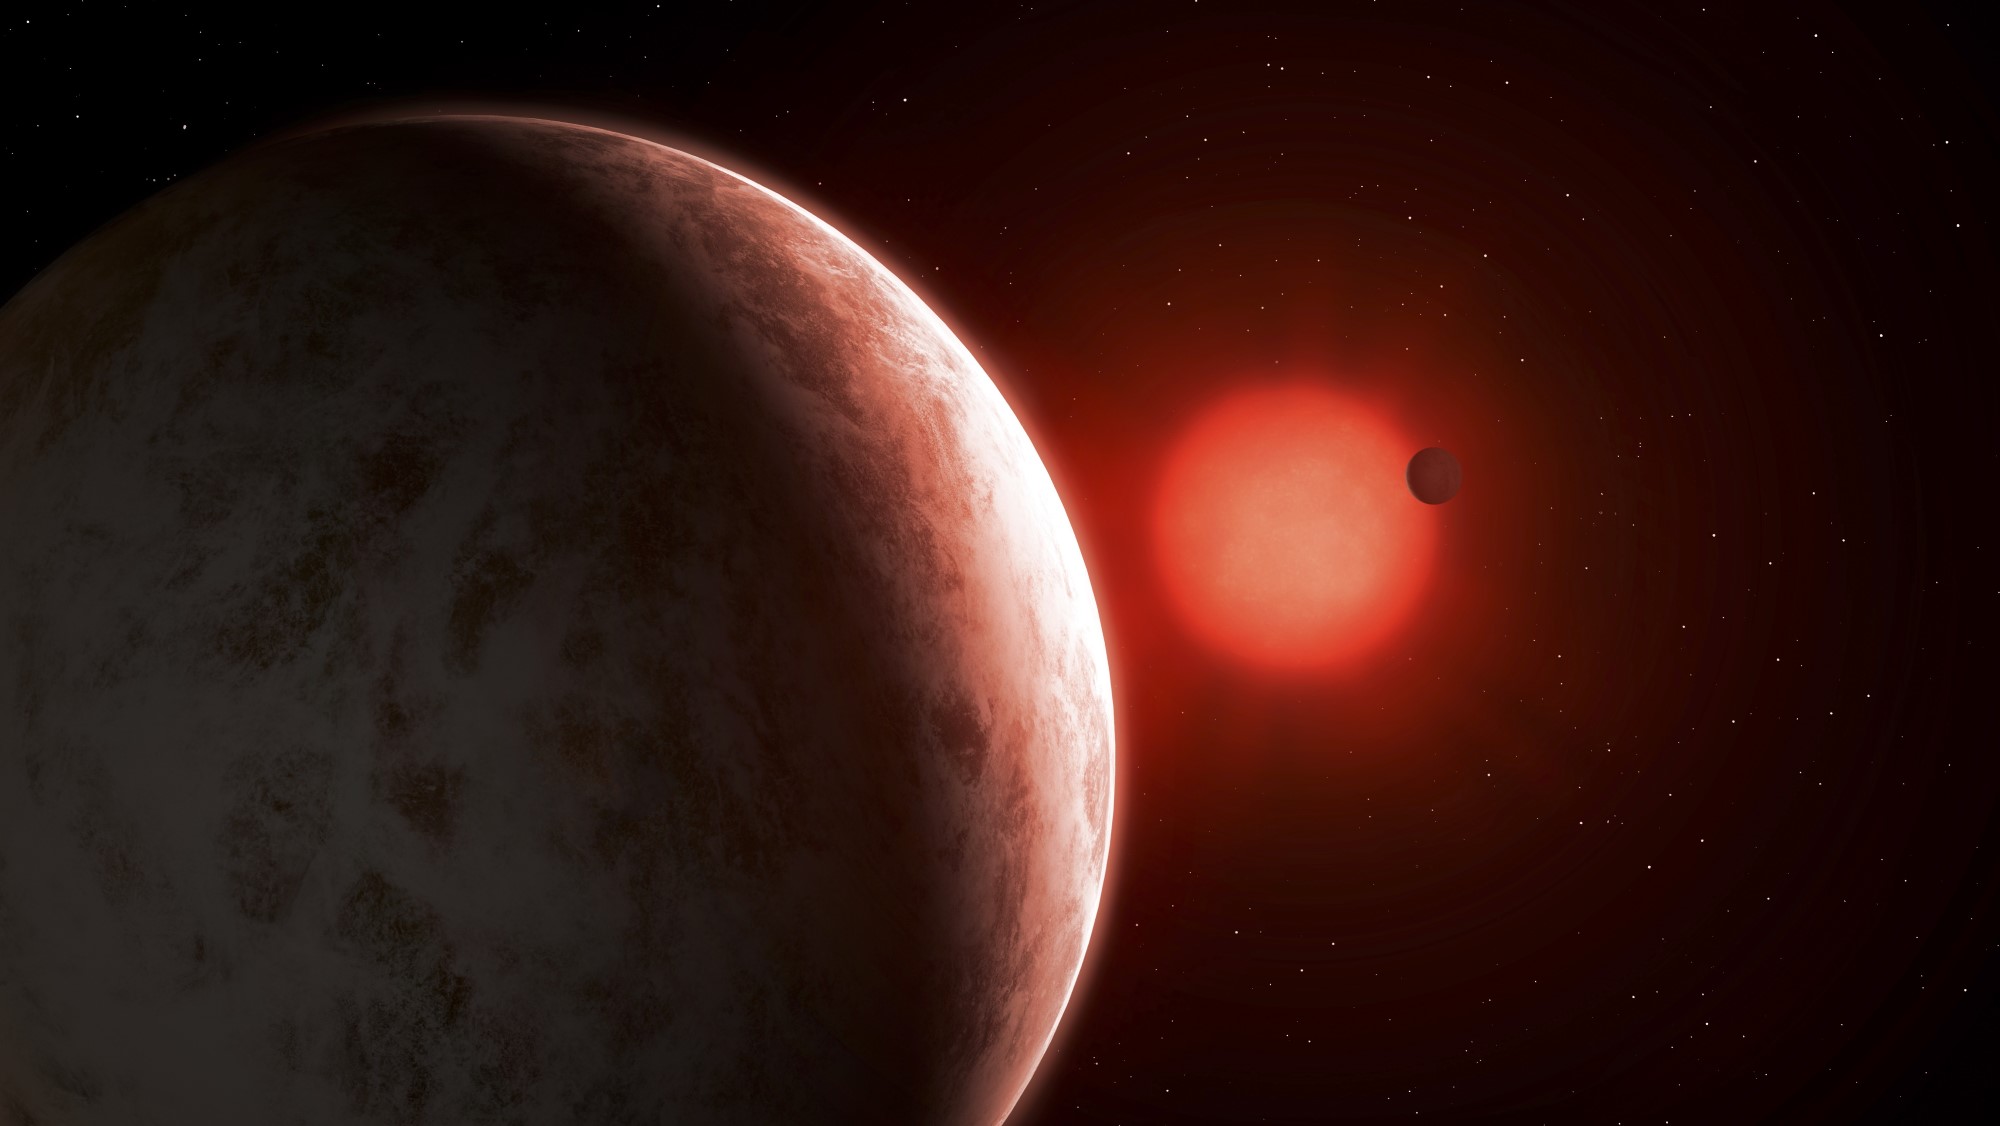 Astronomers spot 2 intriguing alien worlds around ultracool star